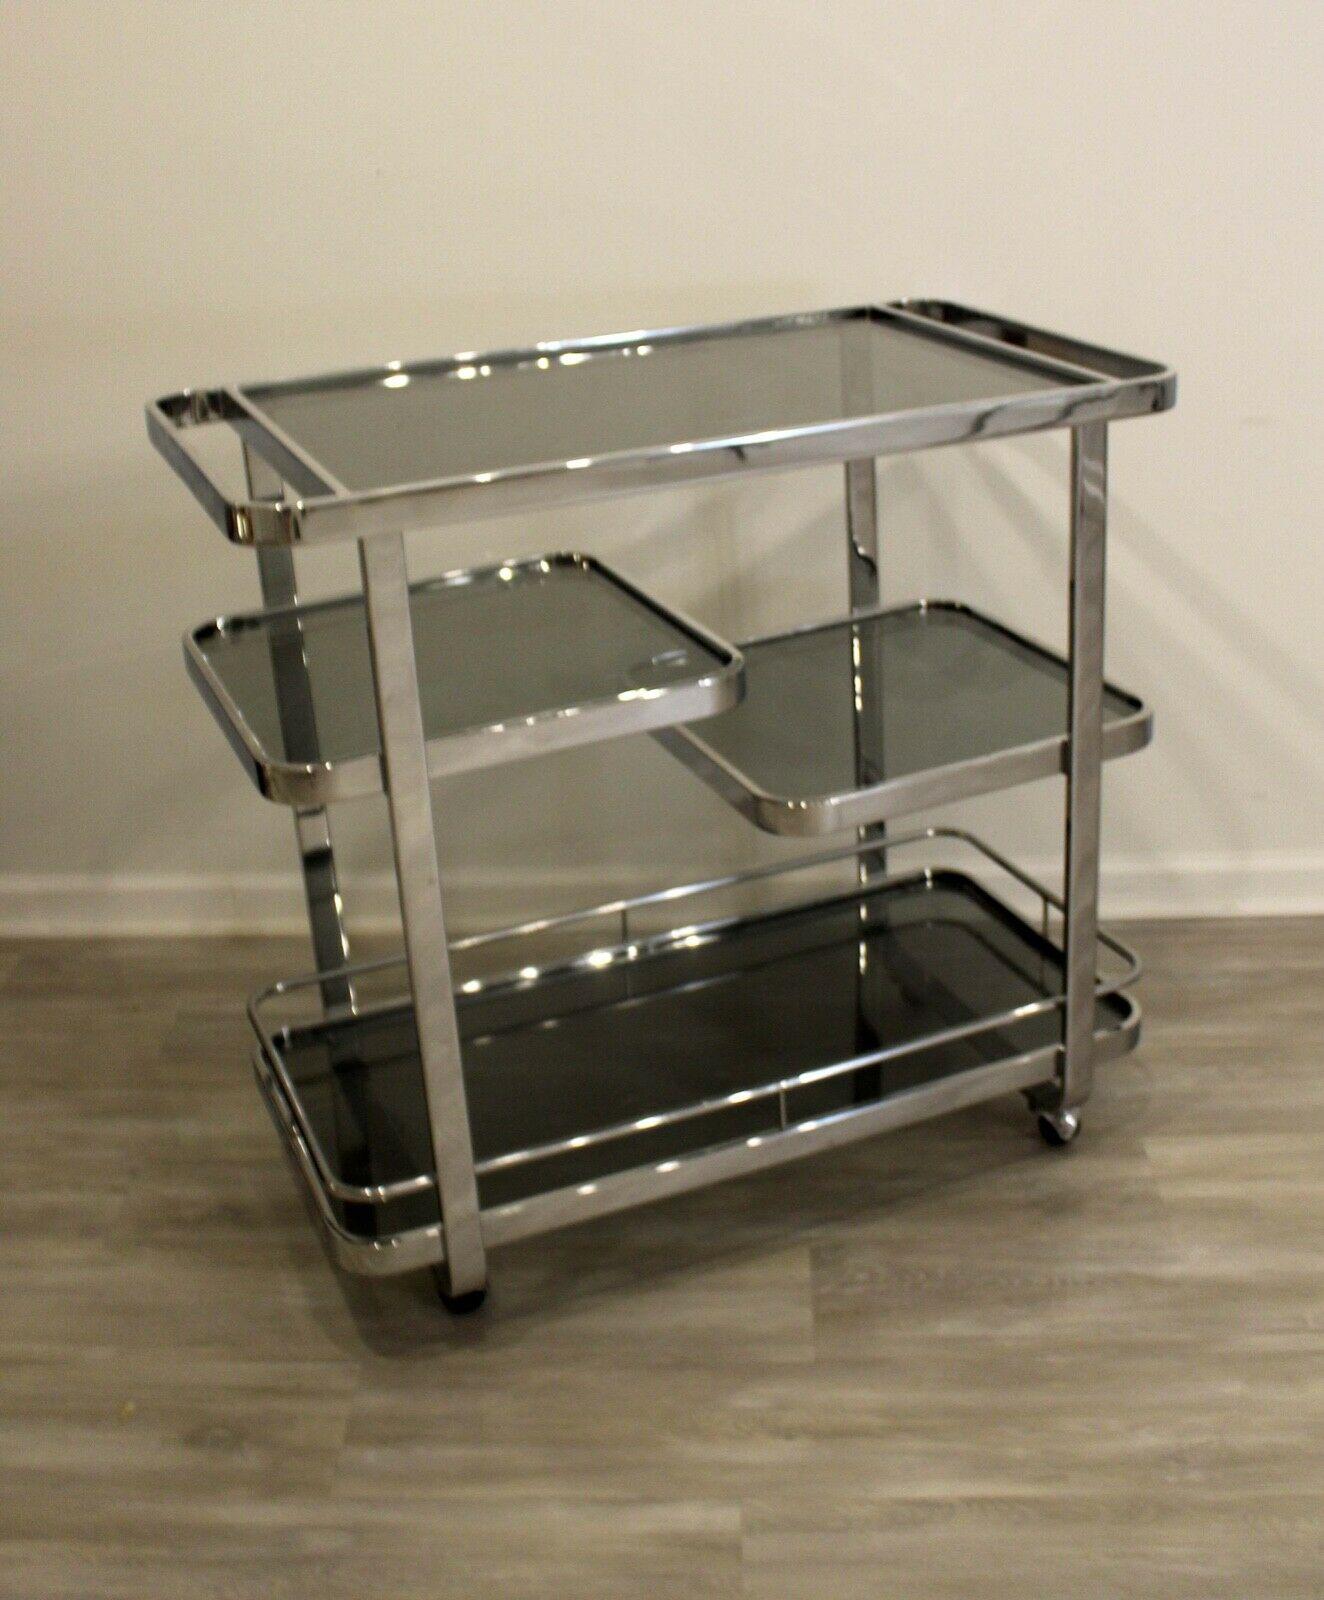 In Michigan we bring to you this polished chrome and grey smoked glass serving cart on casters. Four multi level surfaces provide ample storage for all glassware, beverages and accessories. Postmodern in style, this storage piece will work well with